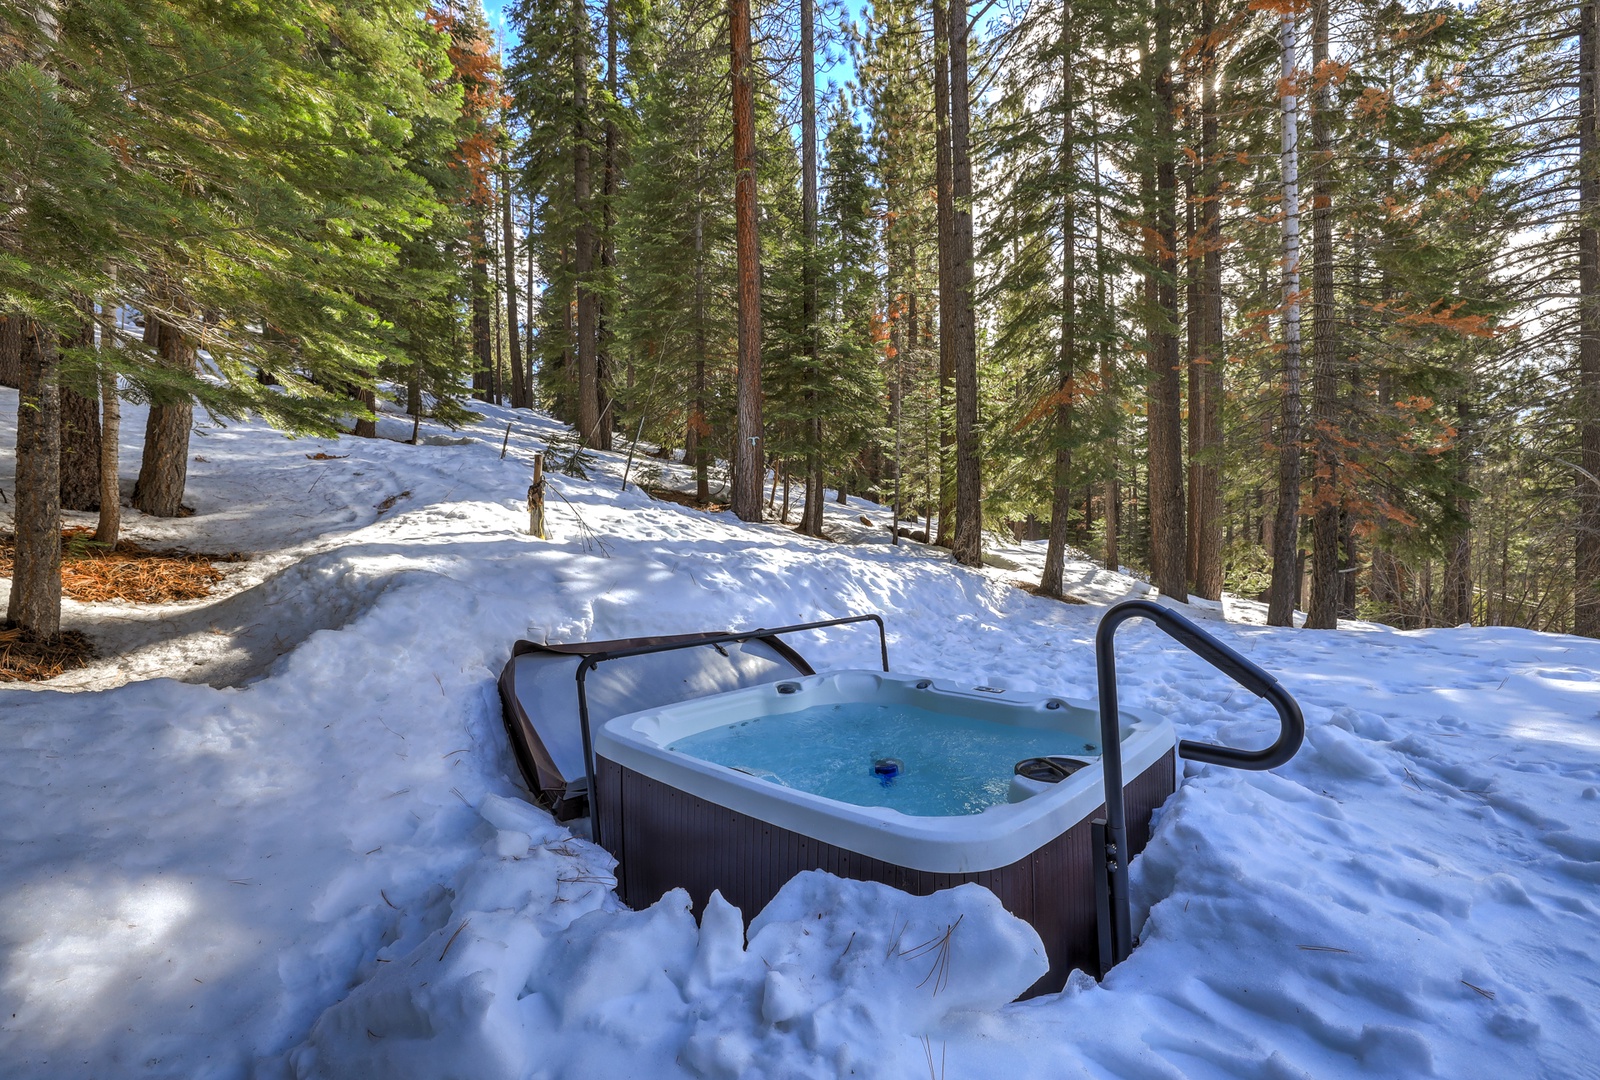 Hot tub exclusive for you and your guests